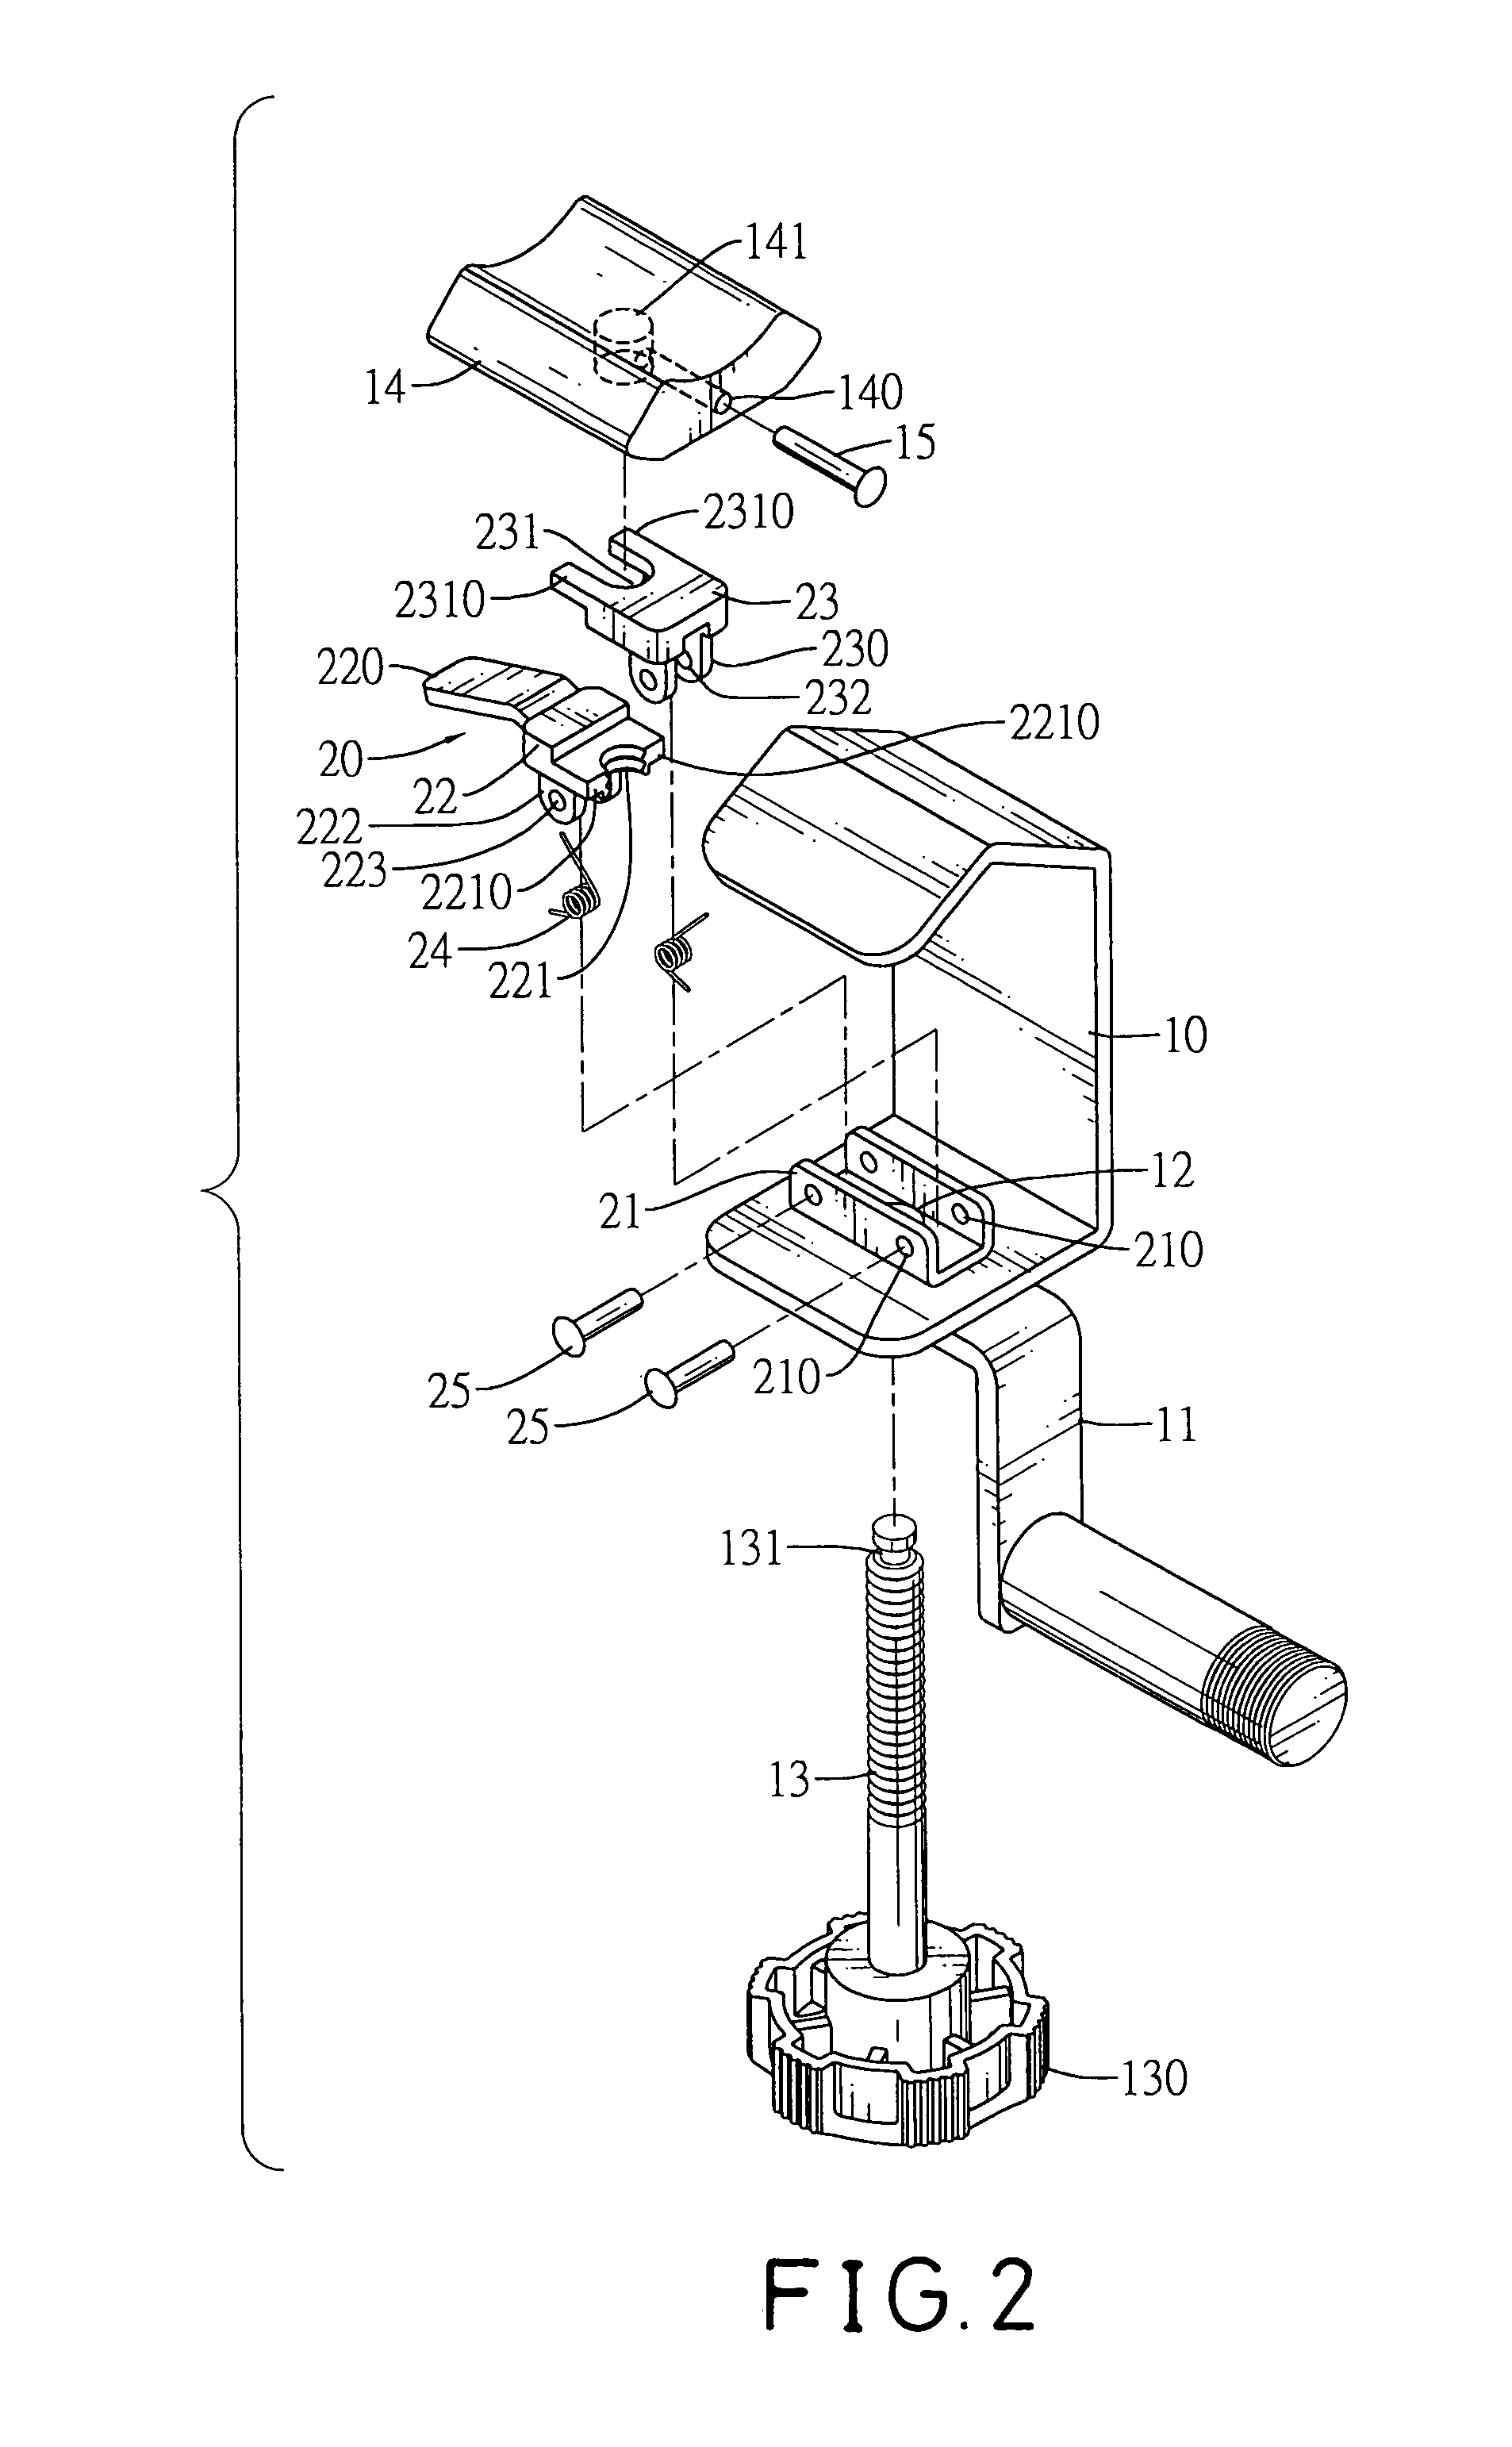 Fast-acting clamp for a musical instrument